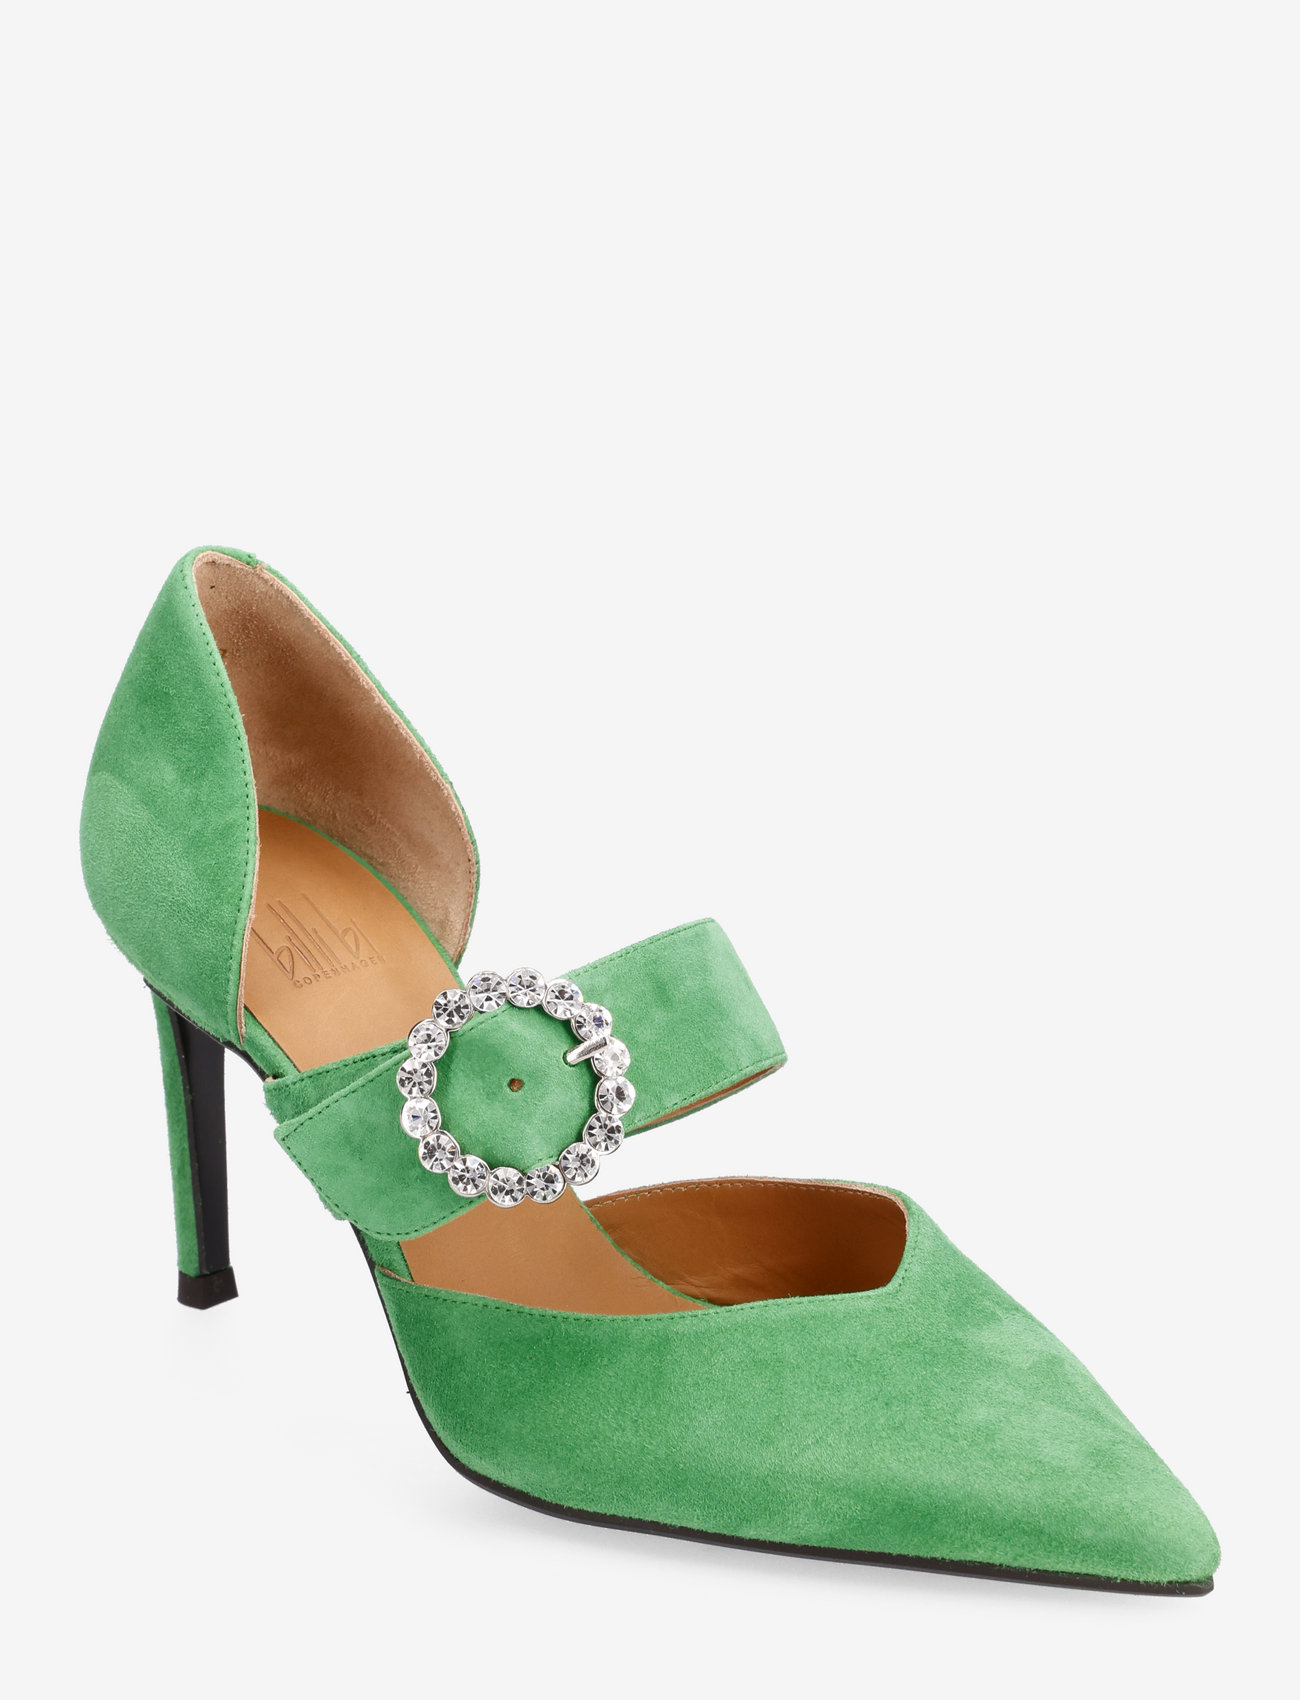 Billi Bi - A4613 - party wear at outlet prices - grass green suede - 0